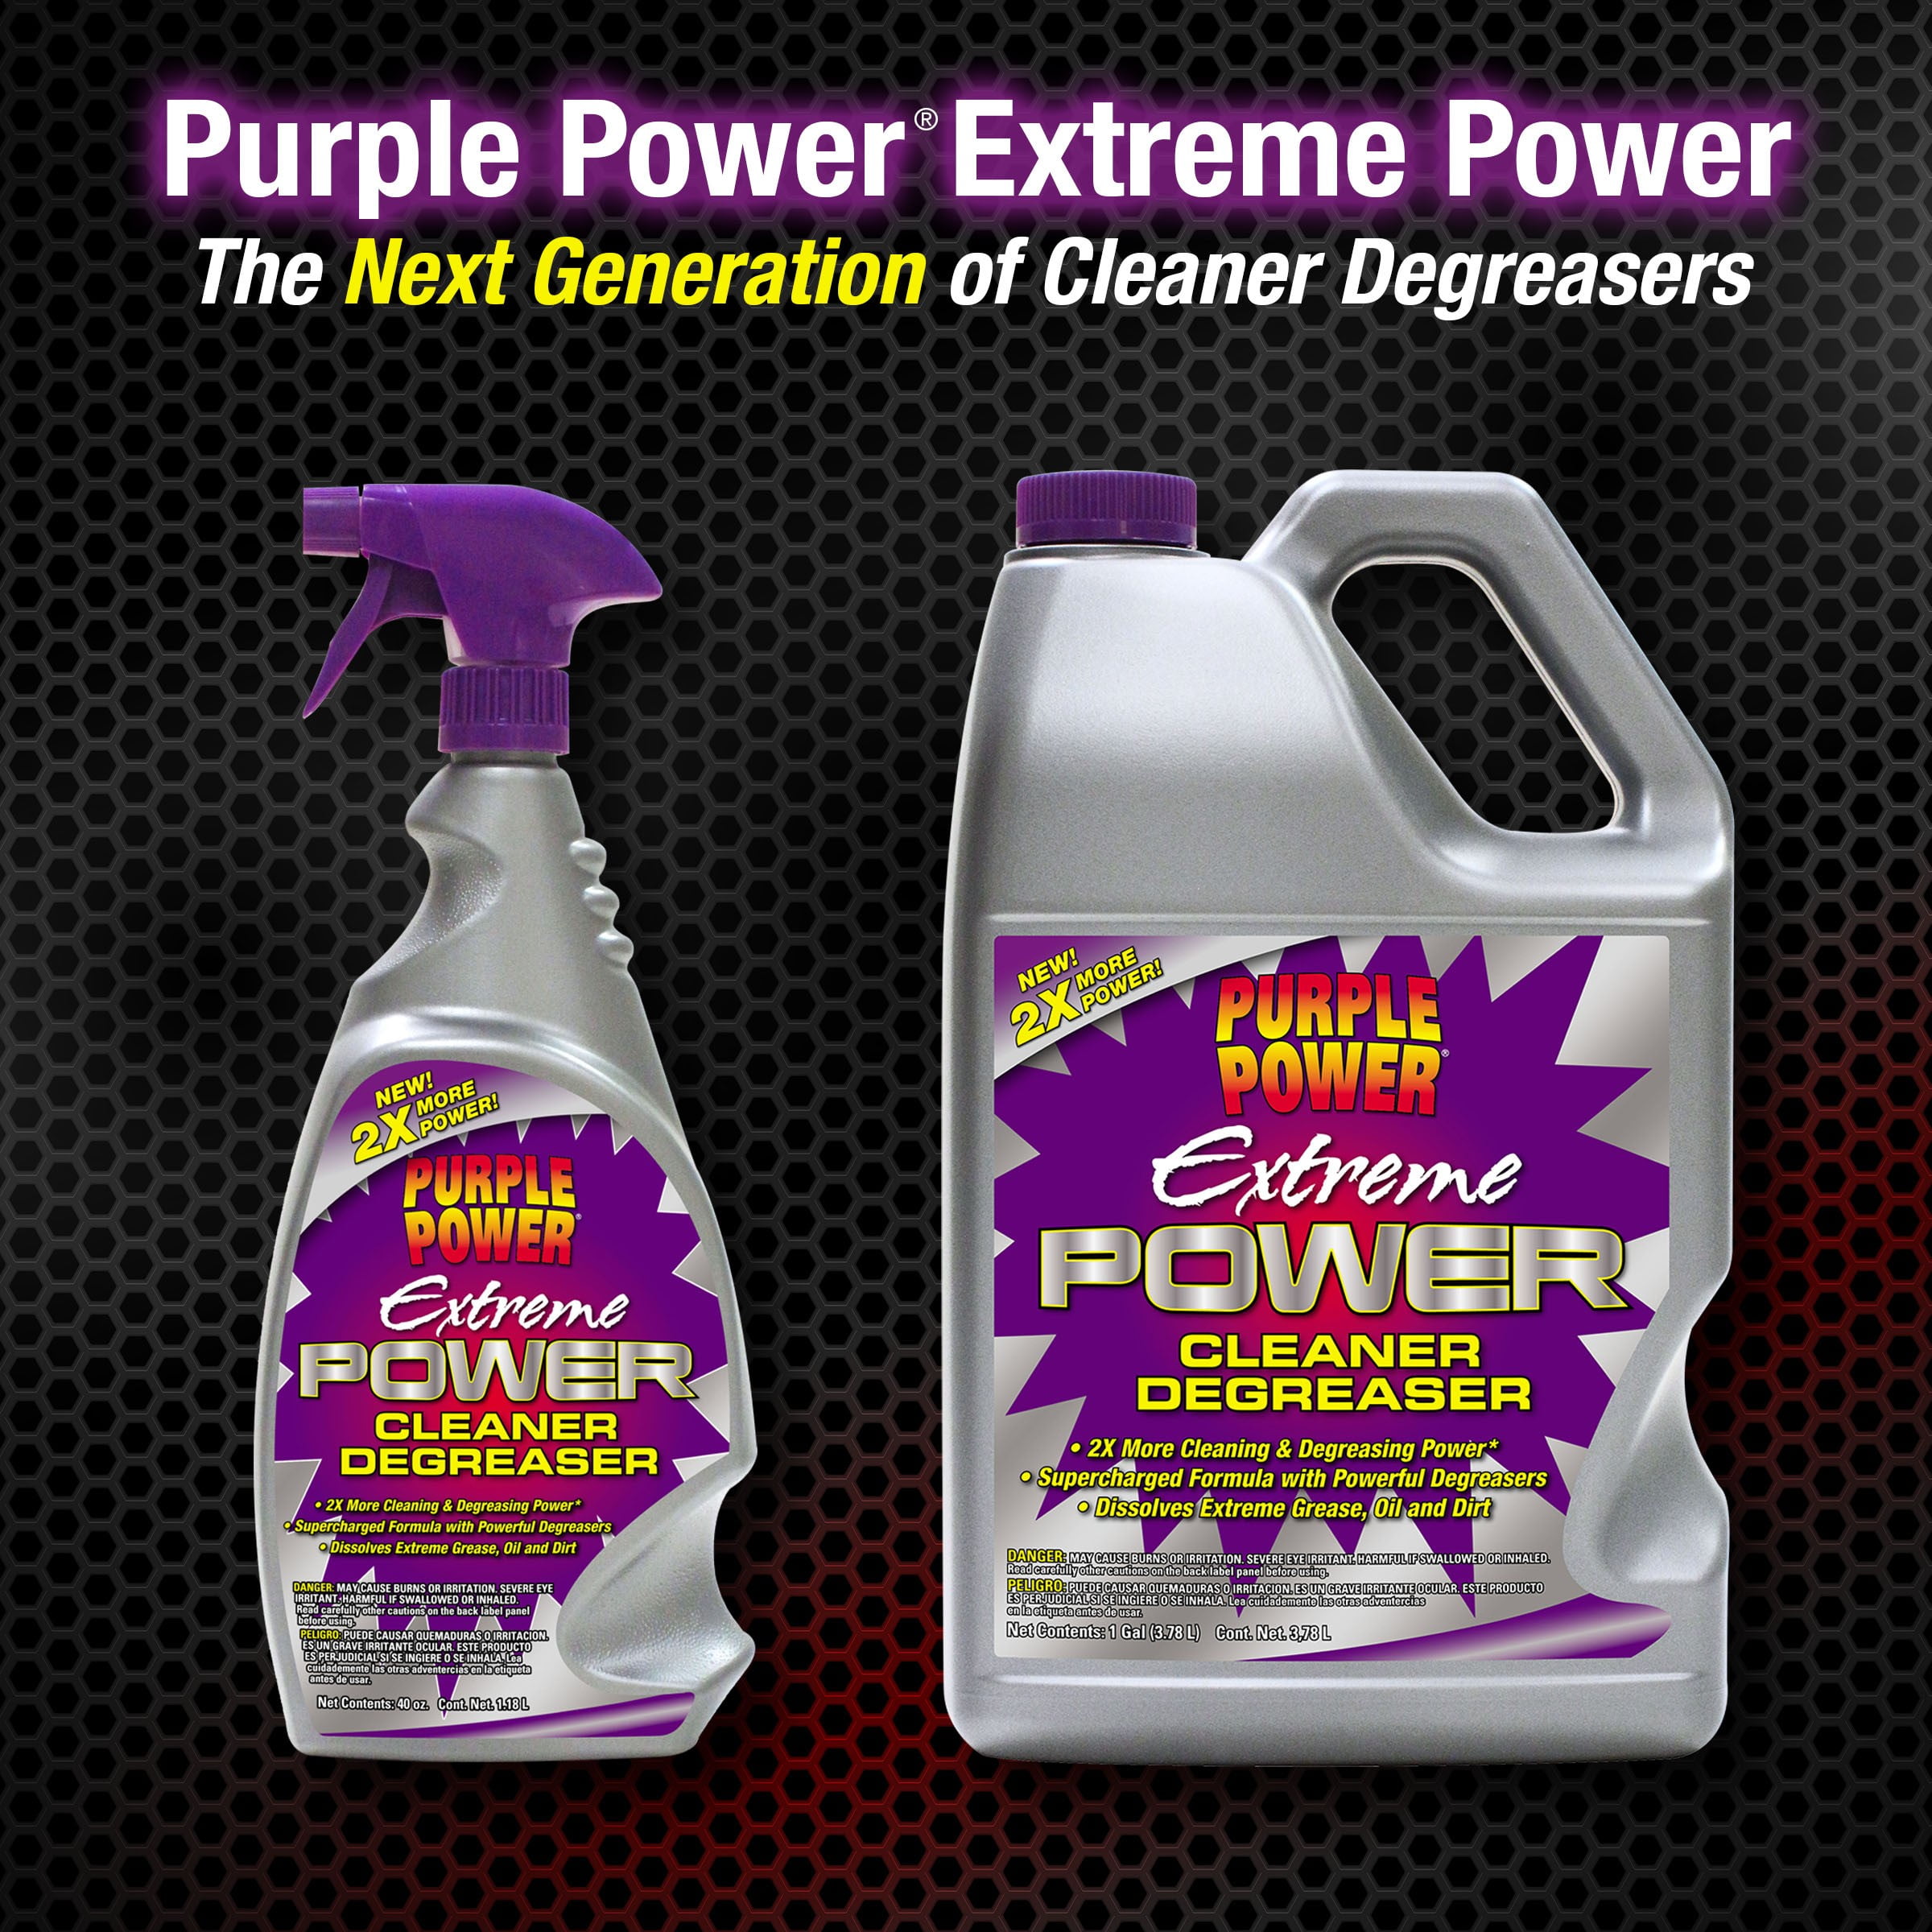  Purple Power (4398PS) Citrus Cleaner - 32 oz. : Everything Else